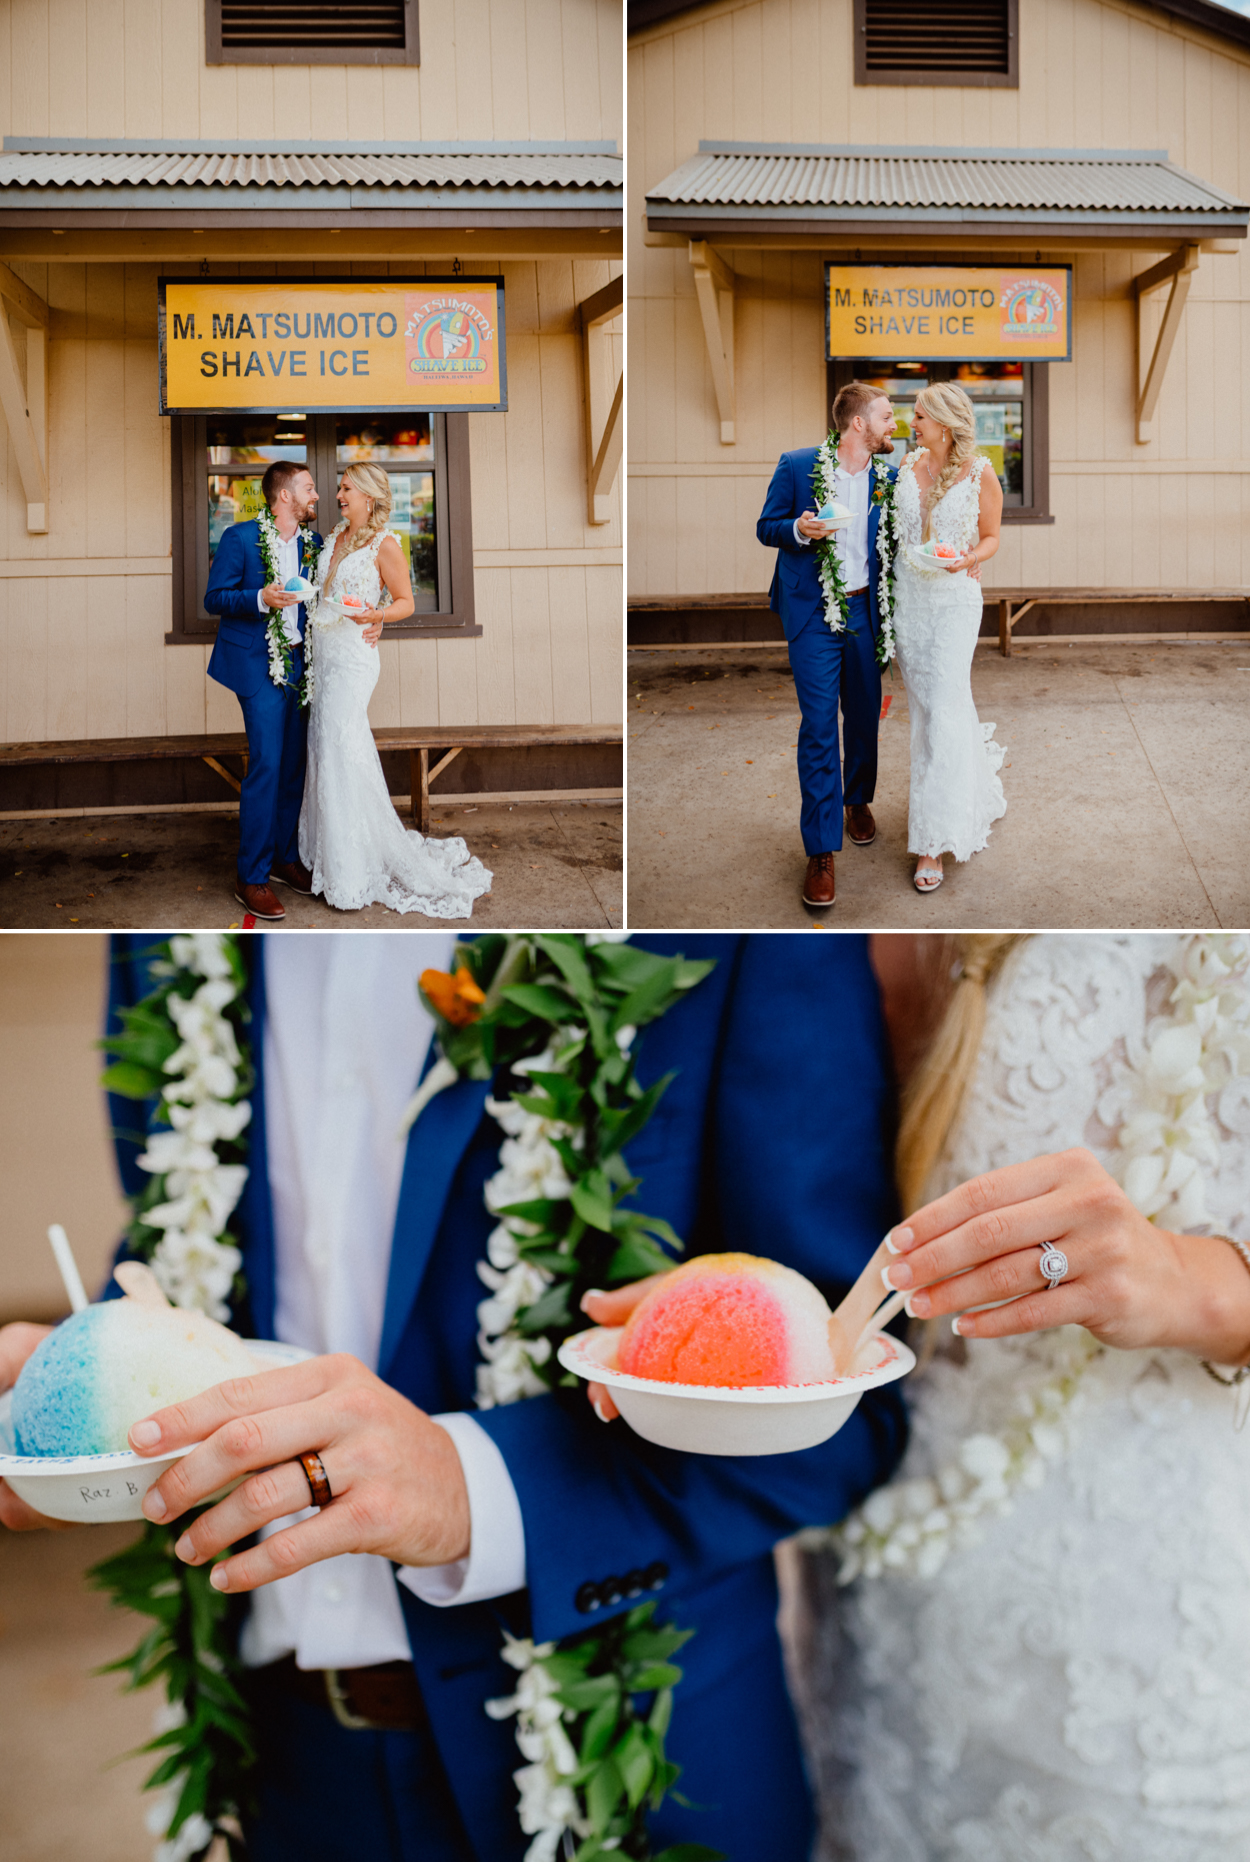 Bride and Groom in Matusmoto shave ice